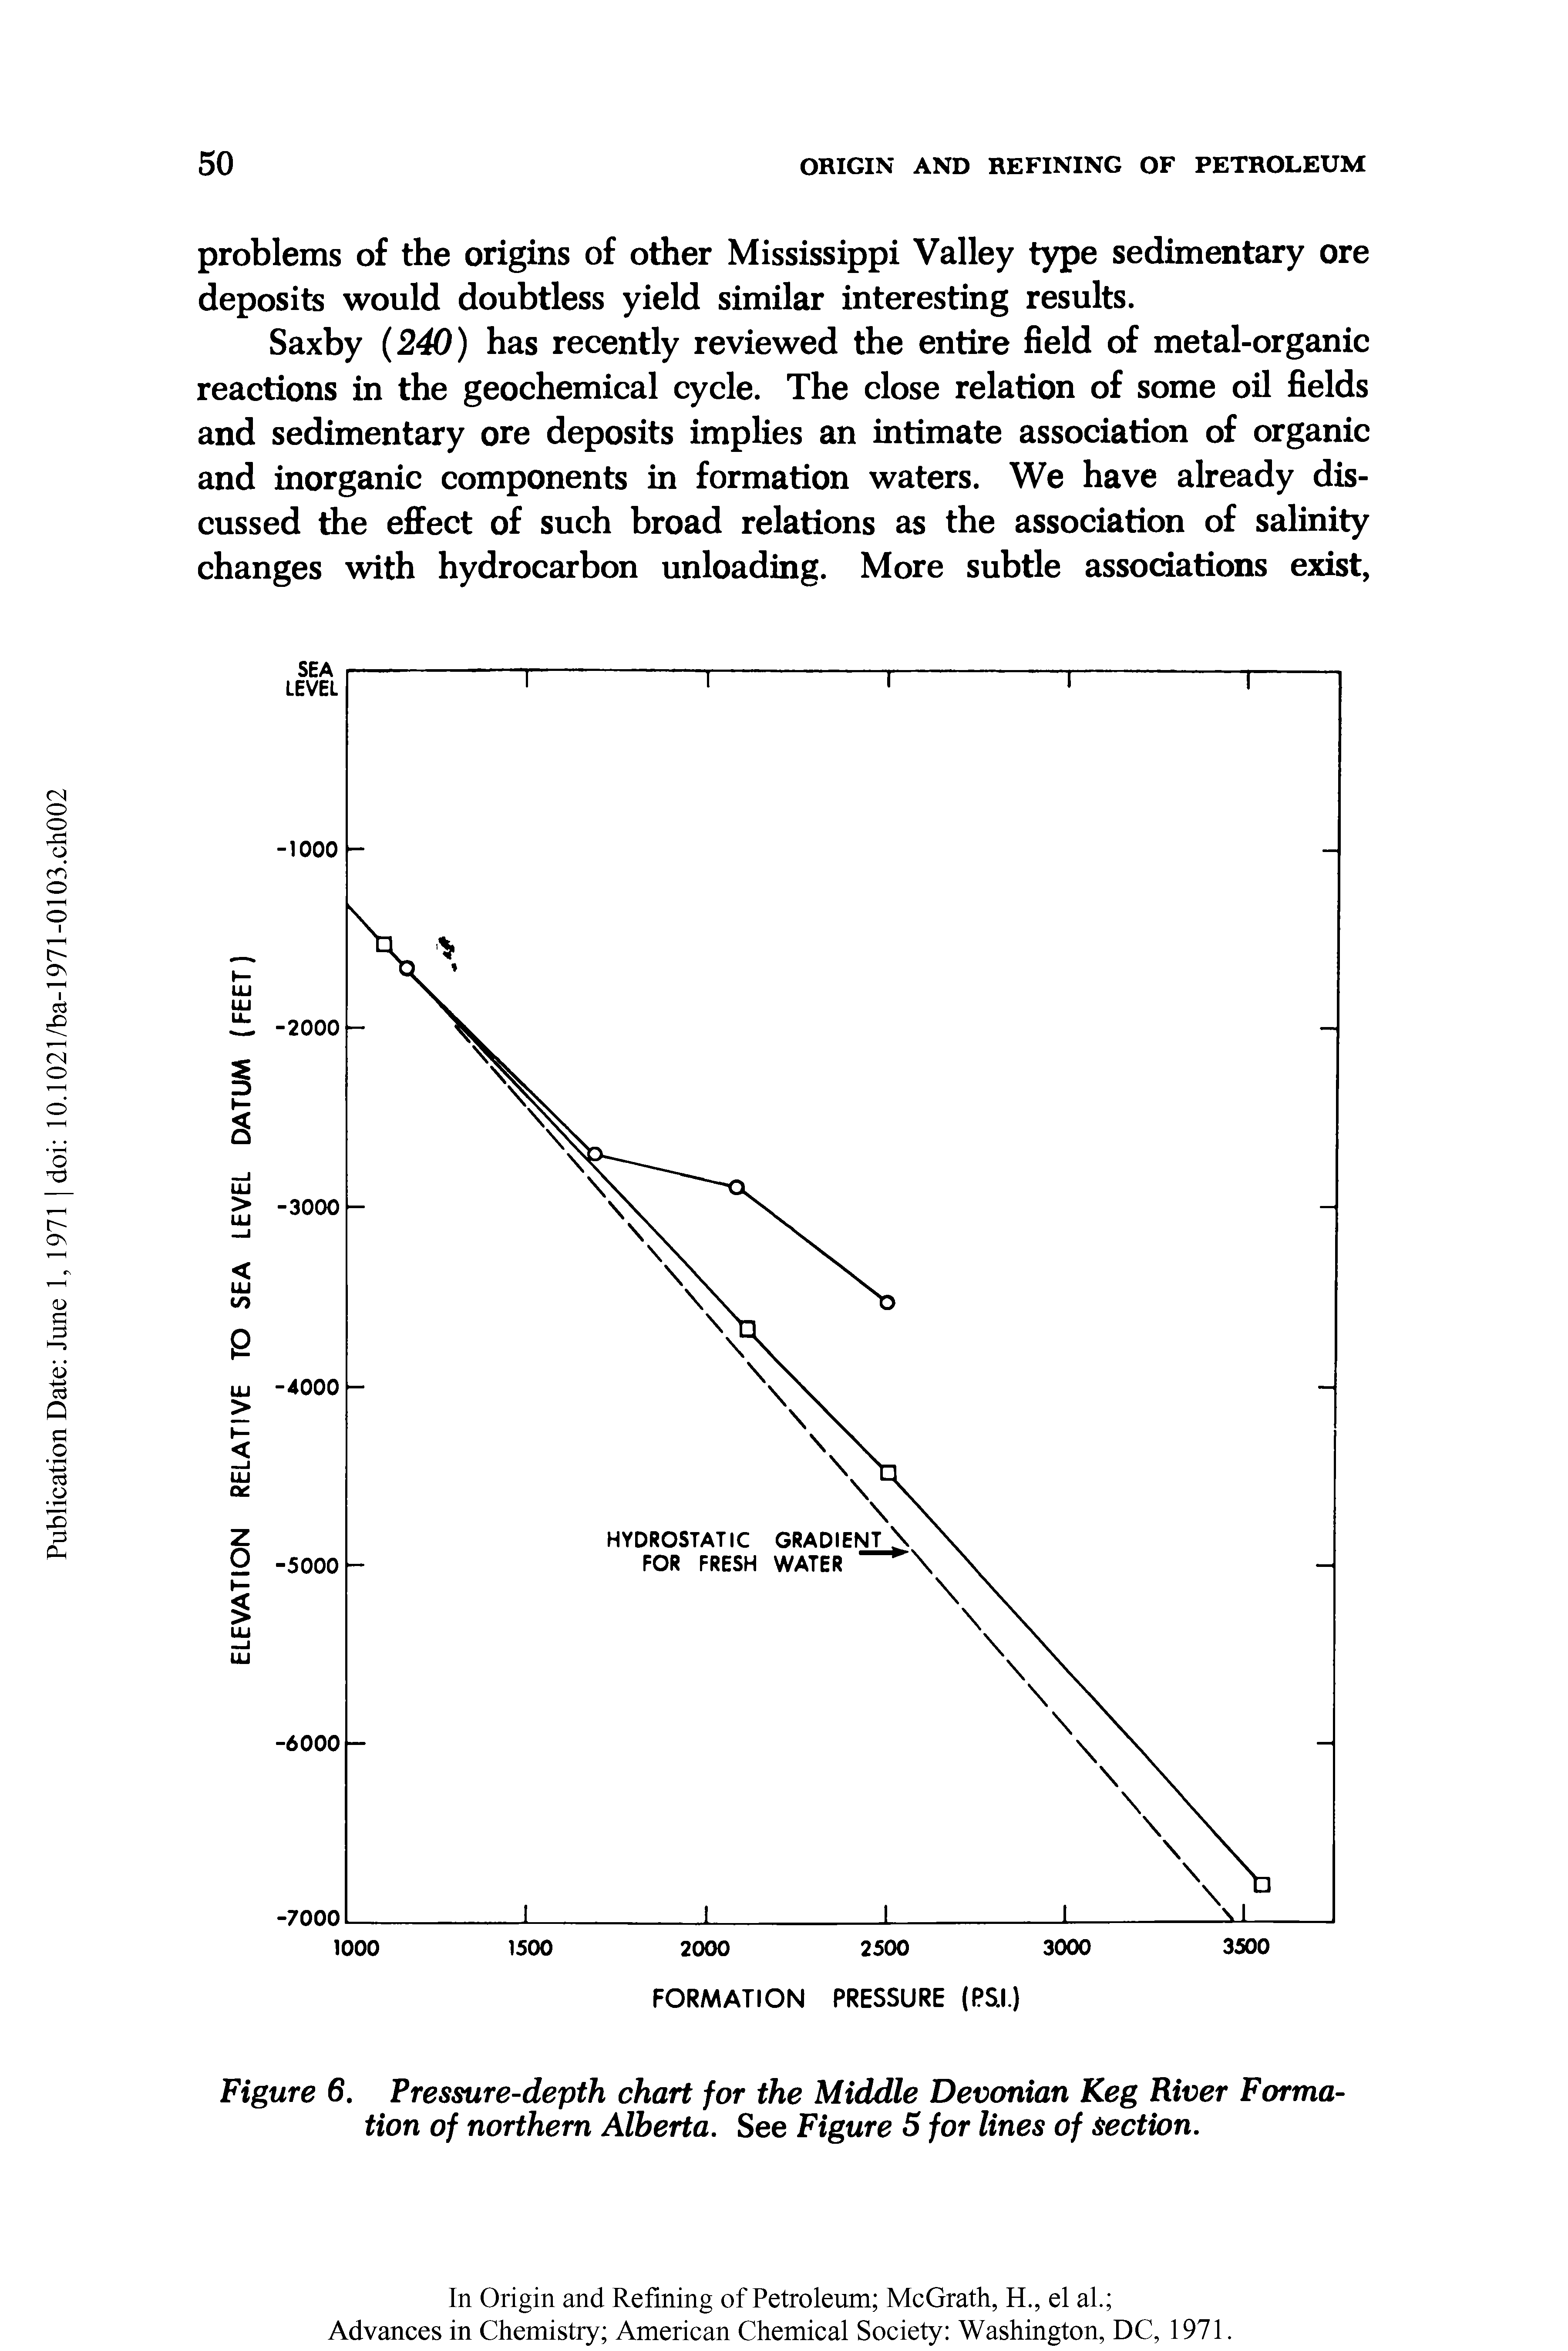 Figure 6. Pressure-depth chart for the Middle Devonian Keg River Formation of northern Alberta. See Figure 5 for lines of section.